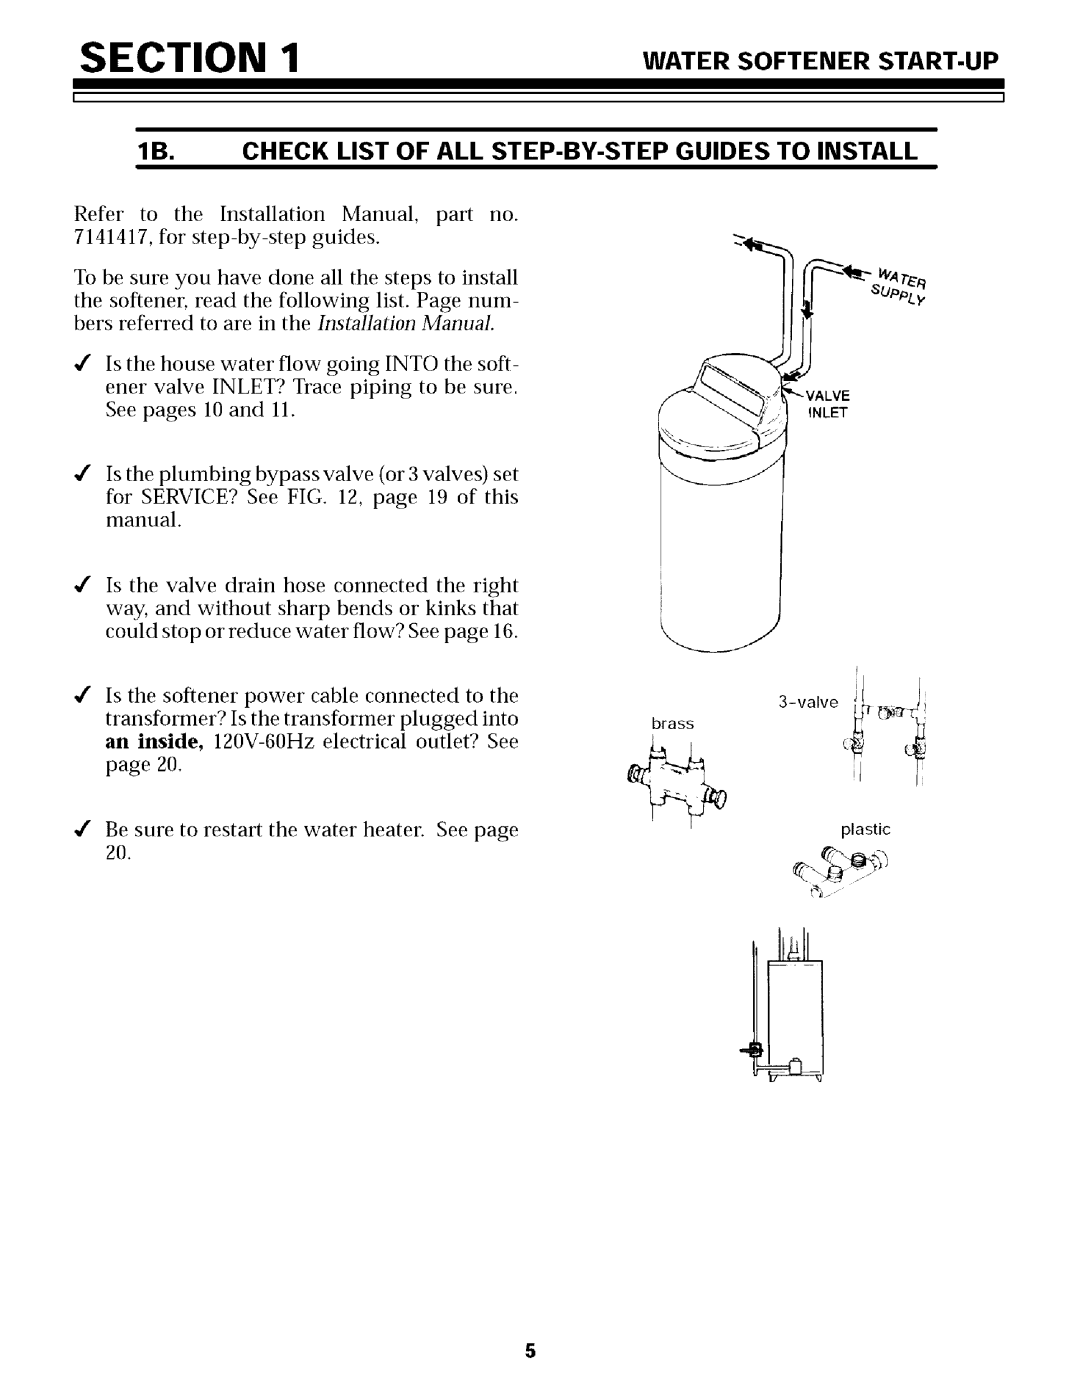 Sears 625.34855, 625.34854 owner manual Water Softener START-UP, Check List of ALL STEP-BY-STEP Guides to Install 